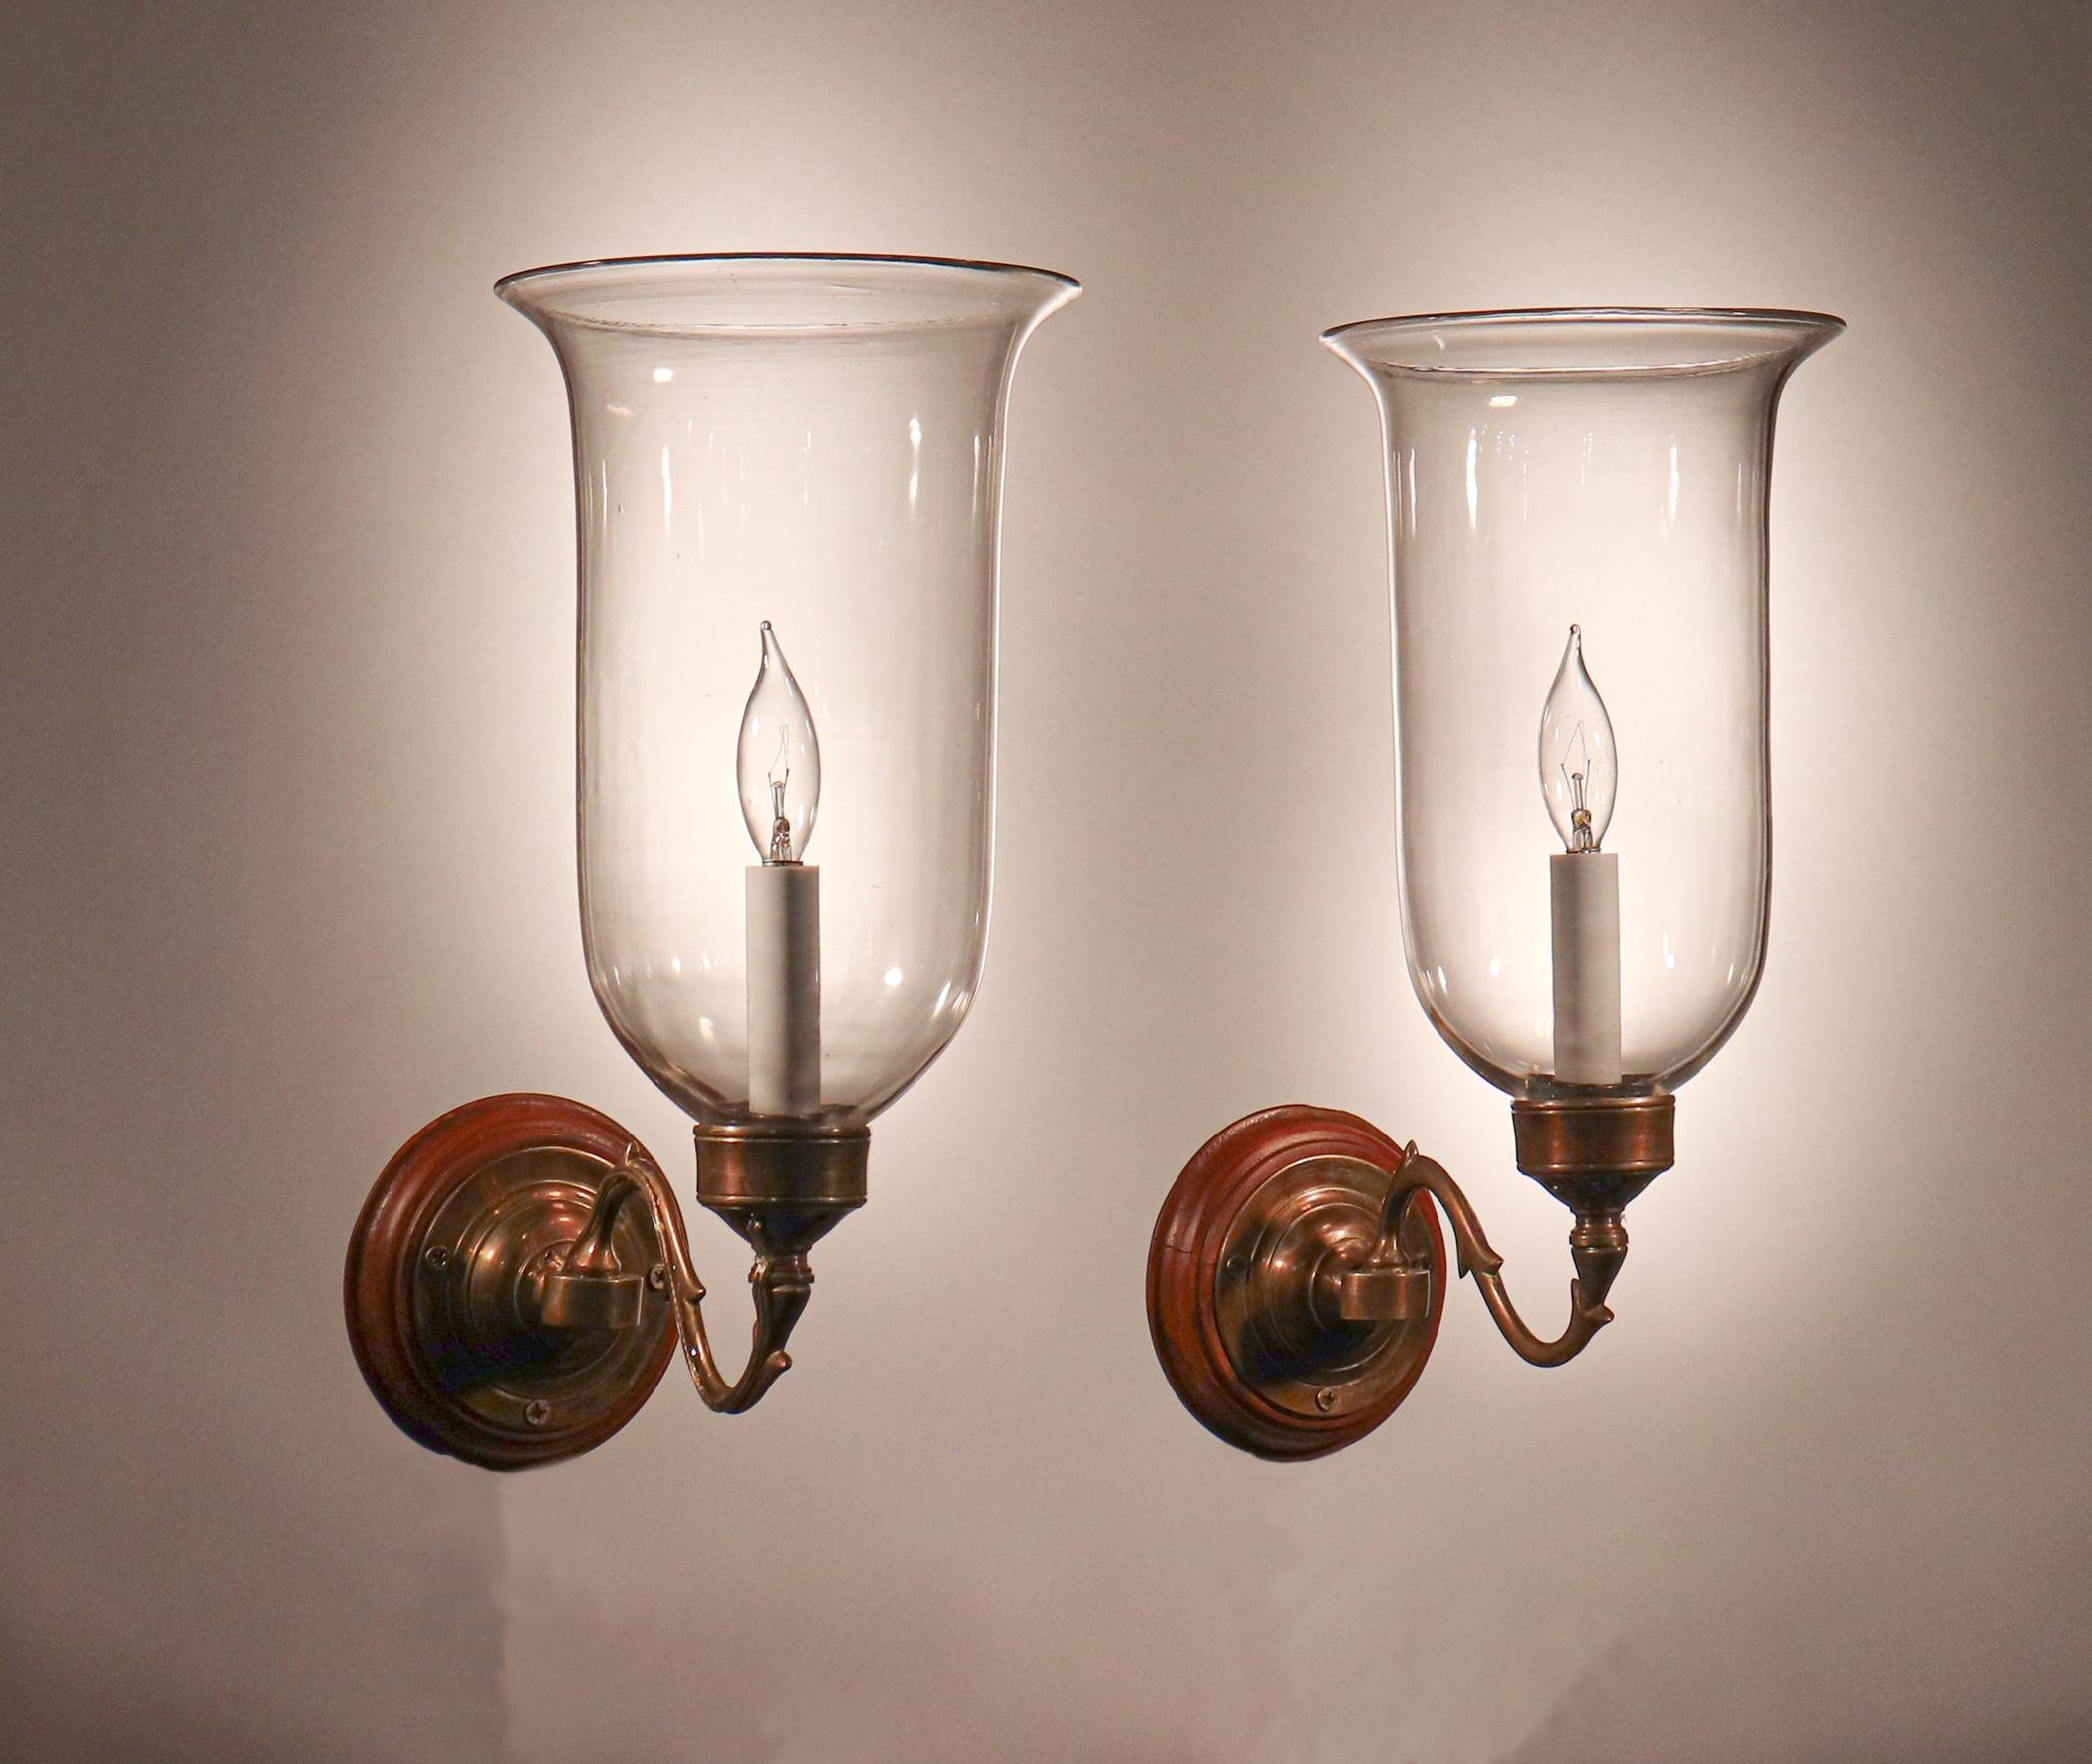 A classic pair of antique English hurricane sconce shades with nice form and a gentle flair. The quality of the hand blown glass is very good, with desirable swirls and air bubbles in both shades. These circa 1900 wall sconces have been newly